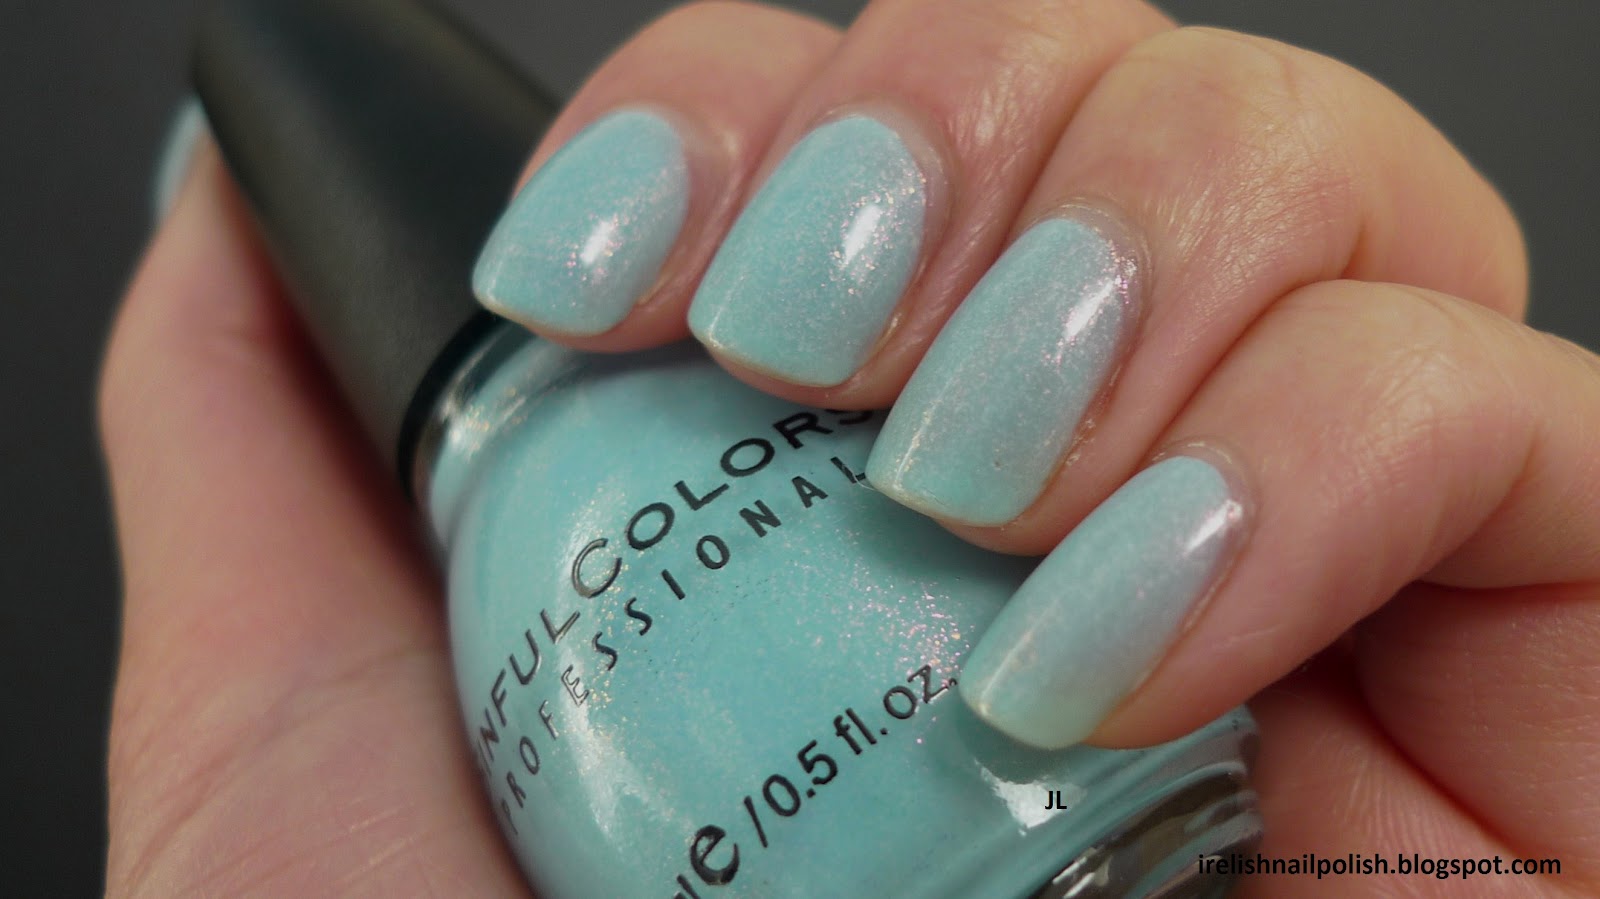 8. Sinful Colors Professional Nail Polish in "Cinderella" - wide 7